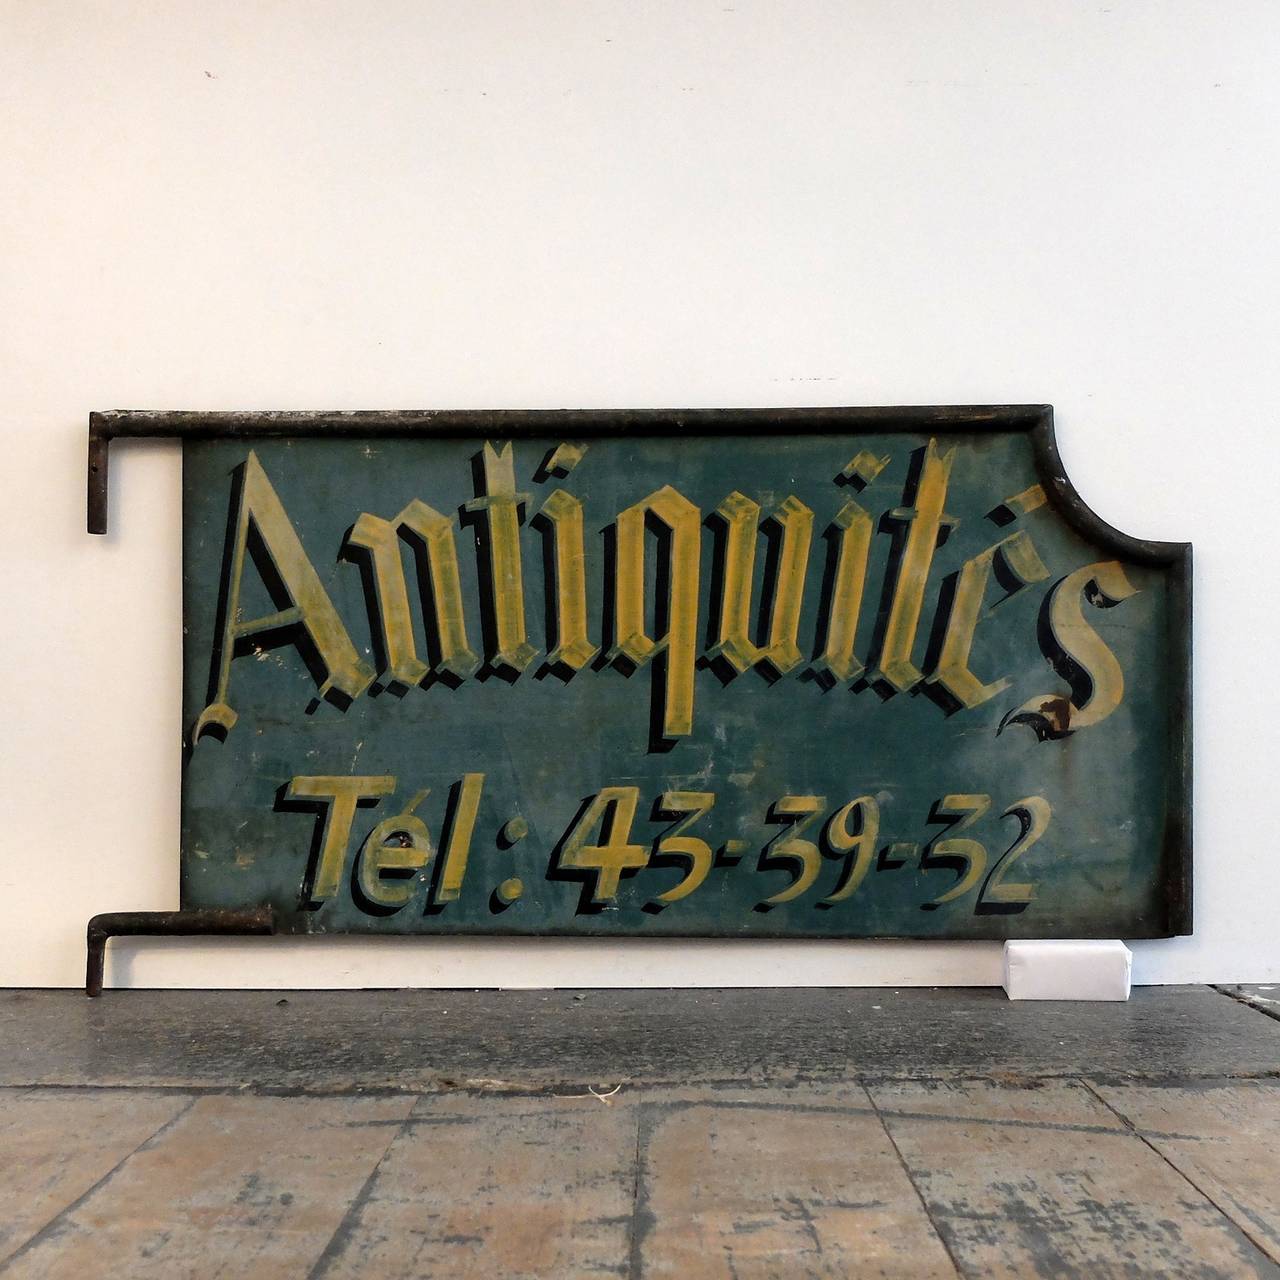 Hand-painted in Gothic script 'Antiquités' with the shop's telephone number below. 
Double-sided (reads the same on both sides).